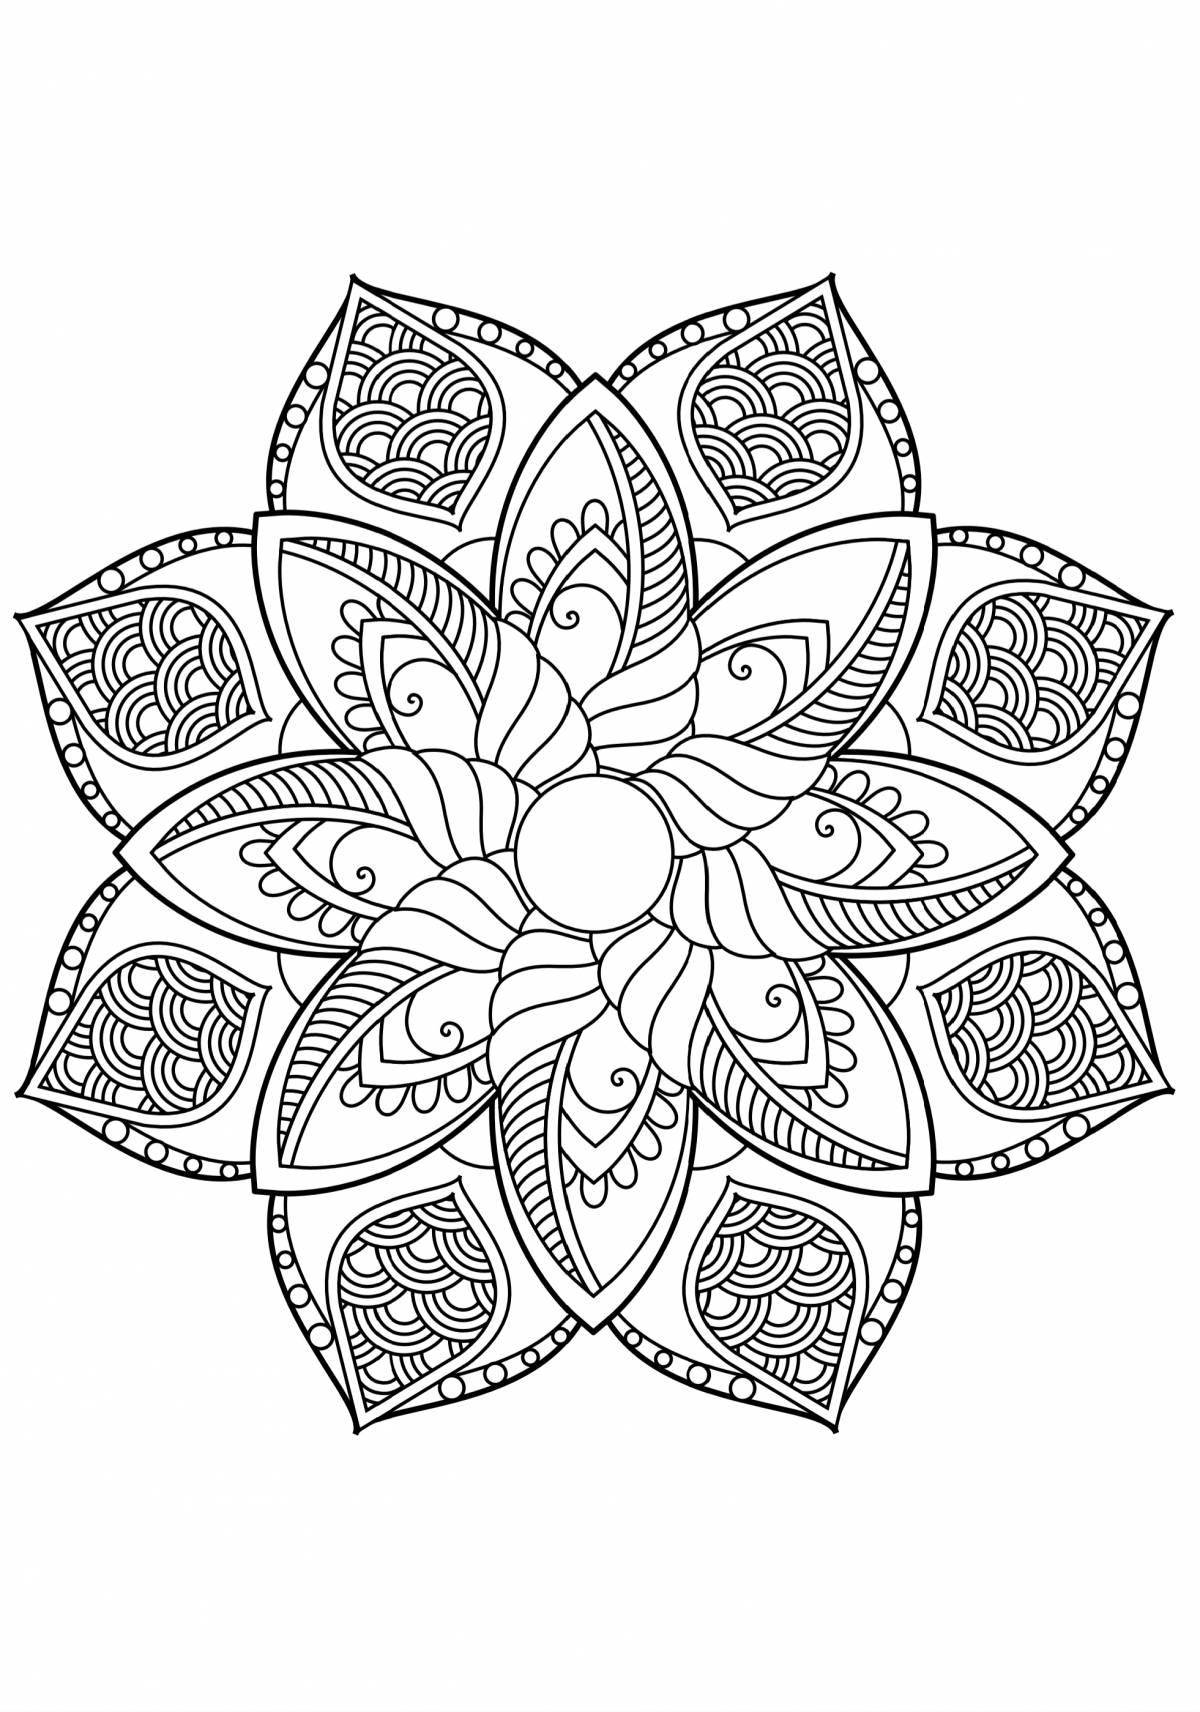 Fantastic flower coloring page